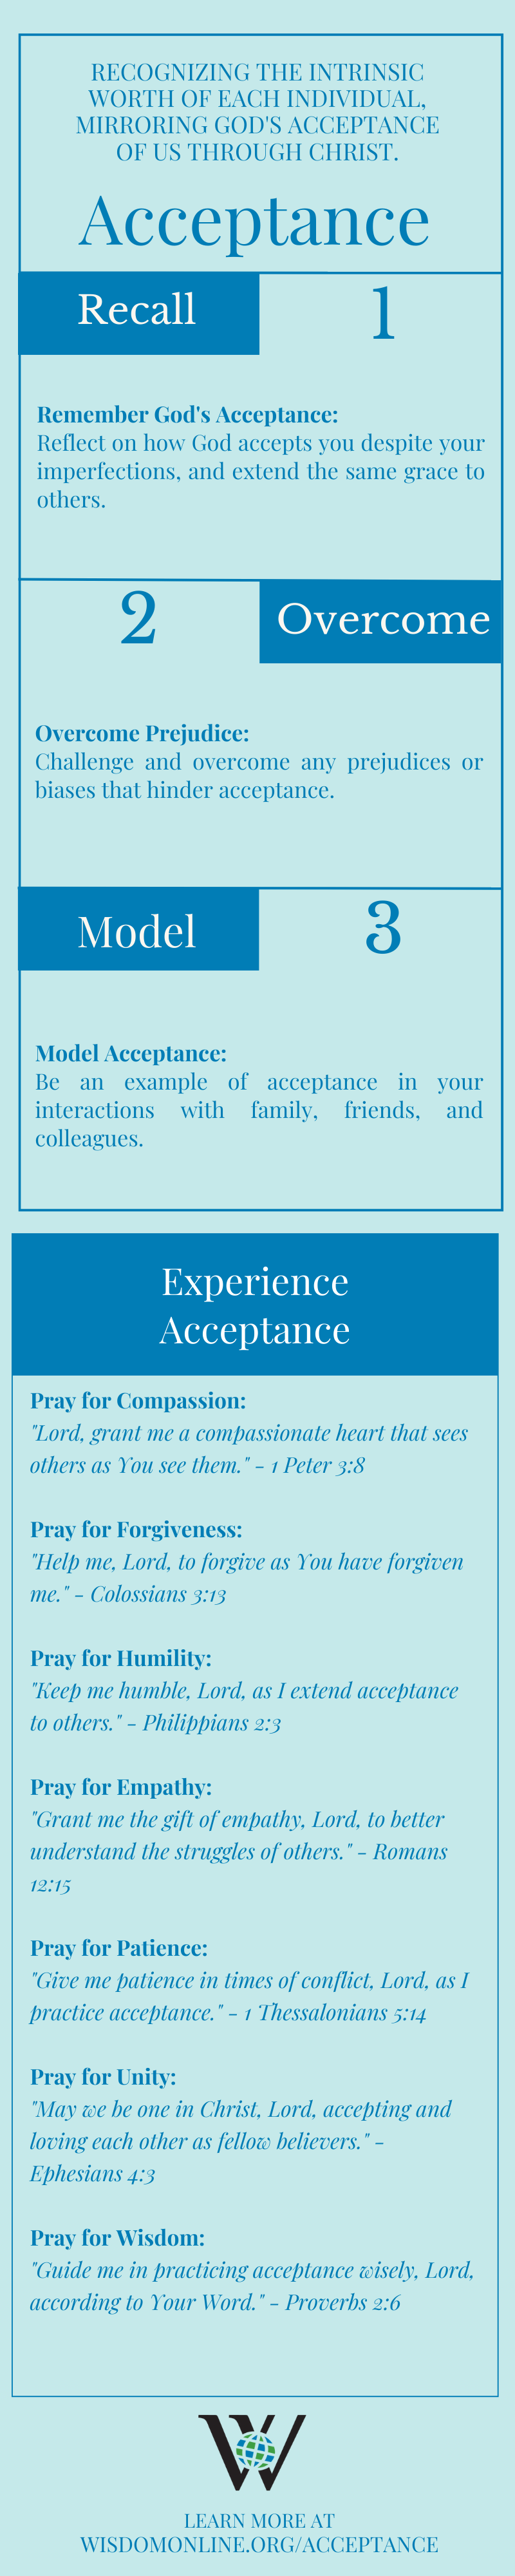 Infographic on the biblical quality of acceptance.